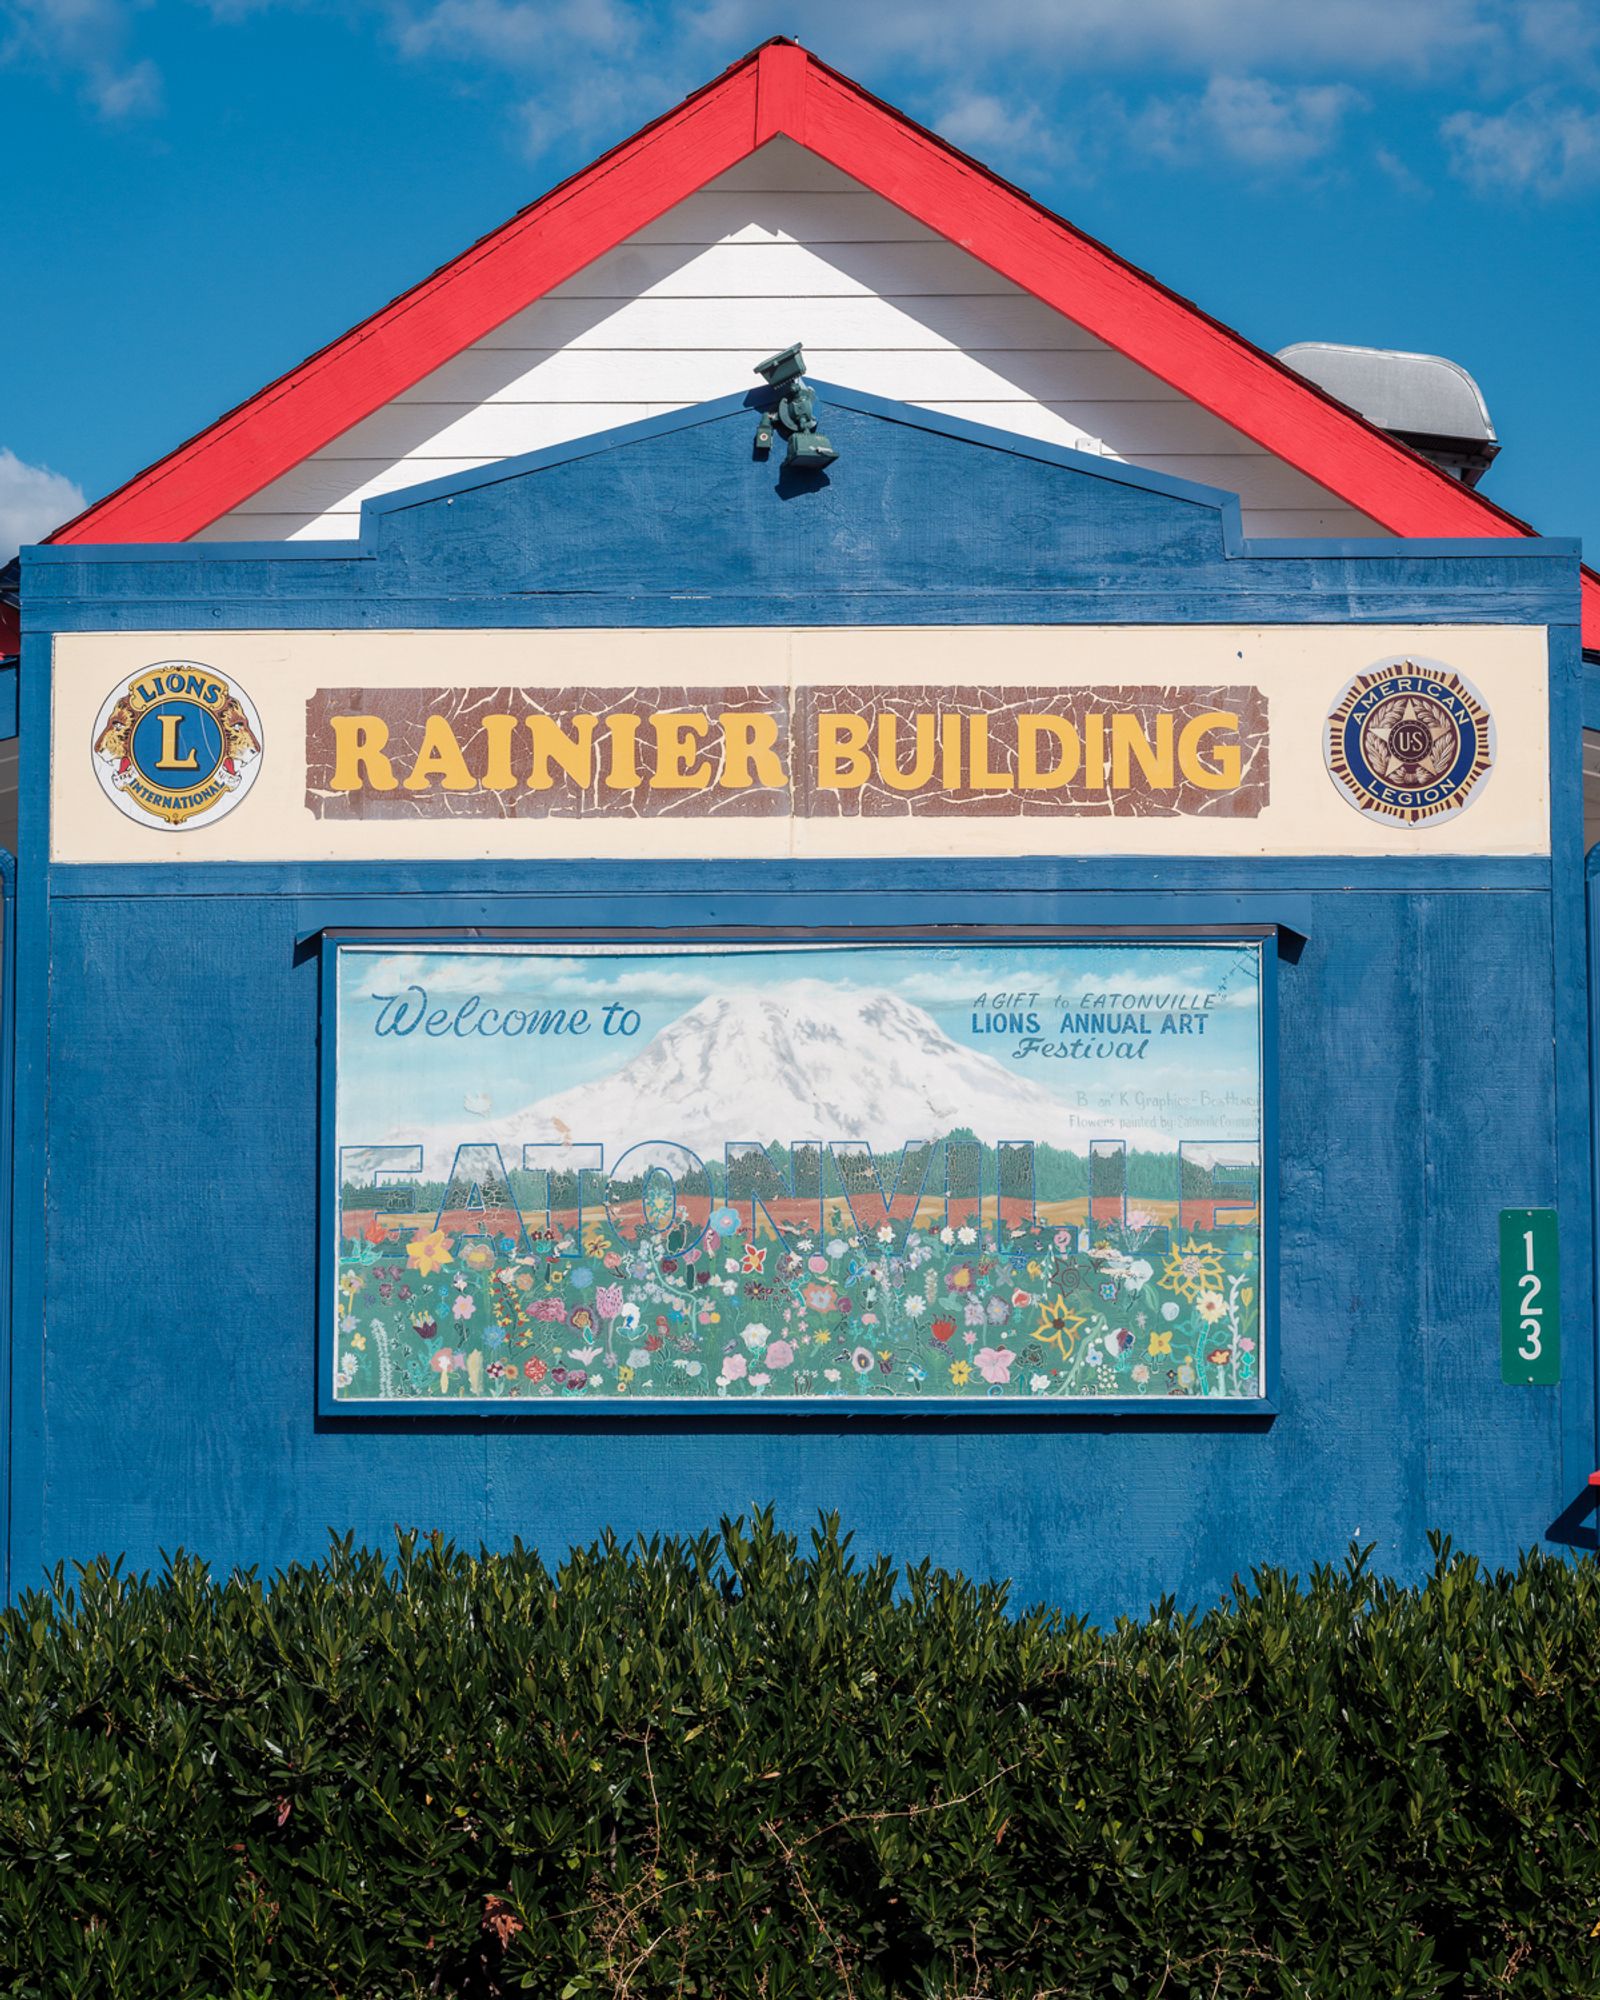 © Alana Celii - The Eatonville Lions Club. For years, the town of Eatonville was a waypoint for visitors to Mount Rainier.